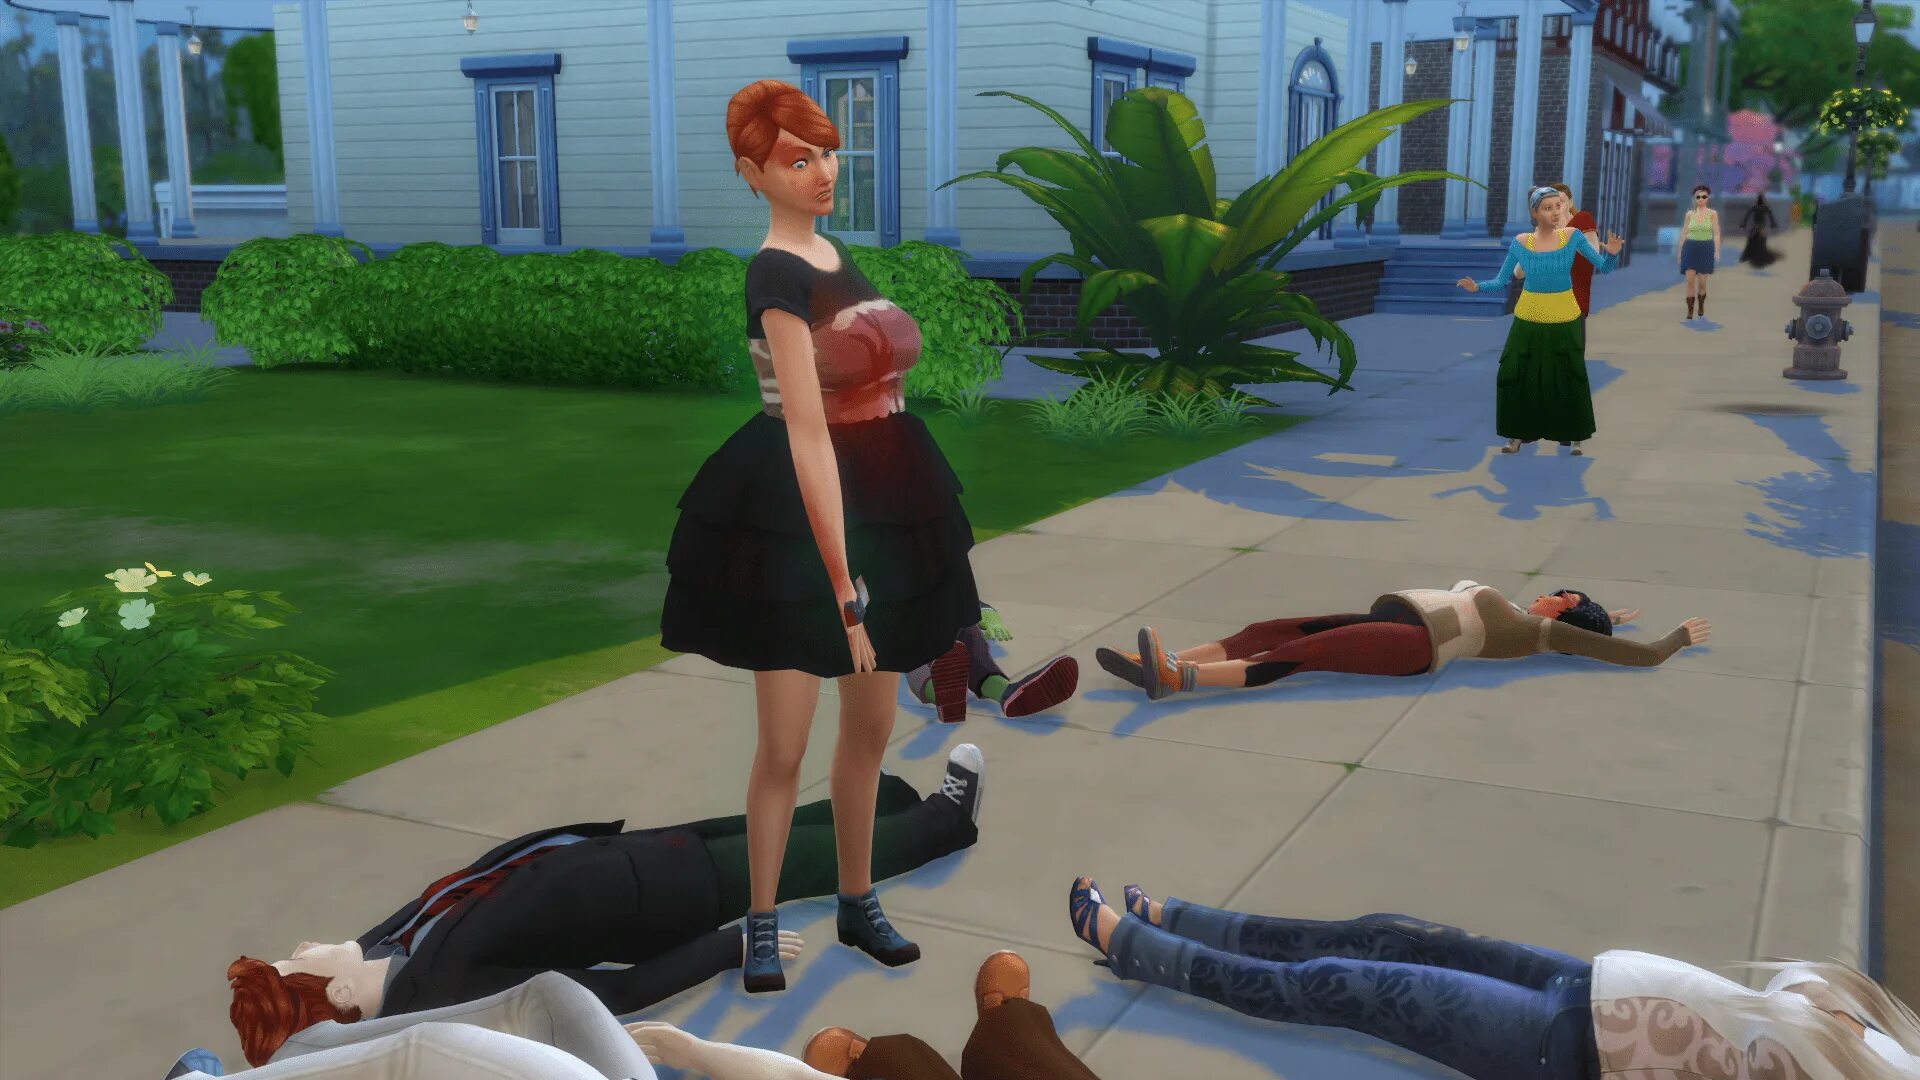 SIMS 4 Murder. The SIMS 5 мода. SIMS 4 violence мод.